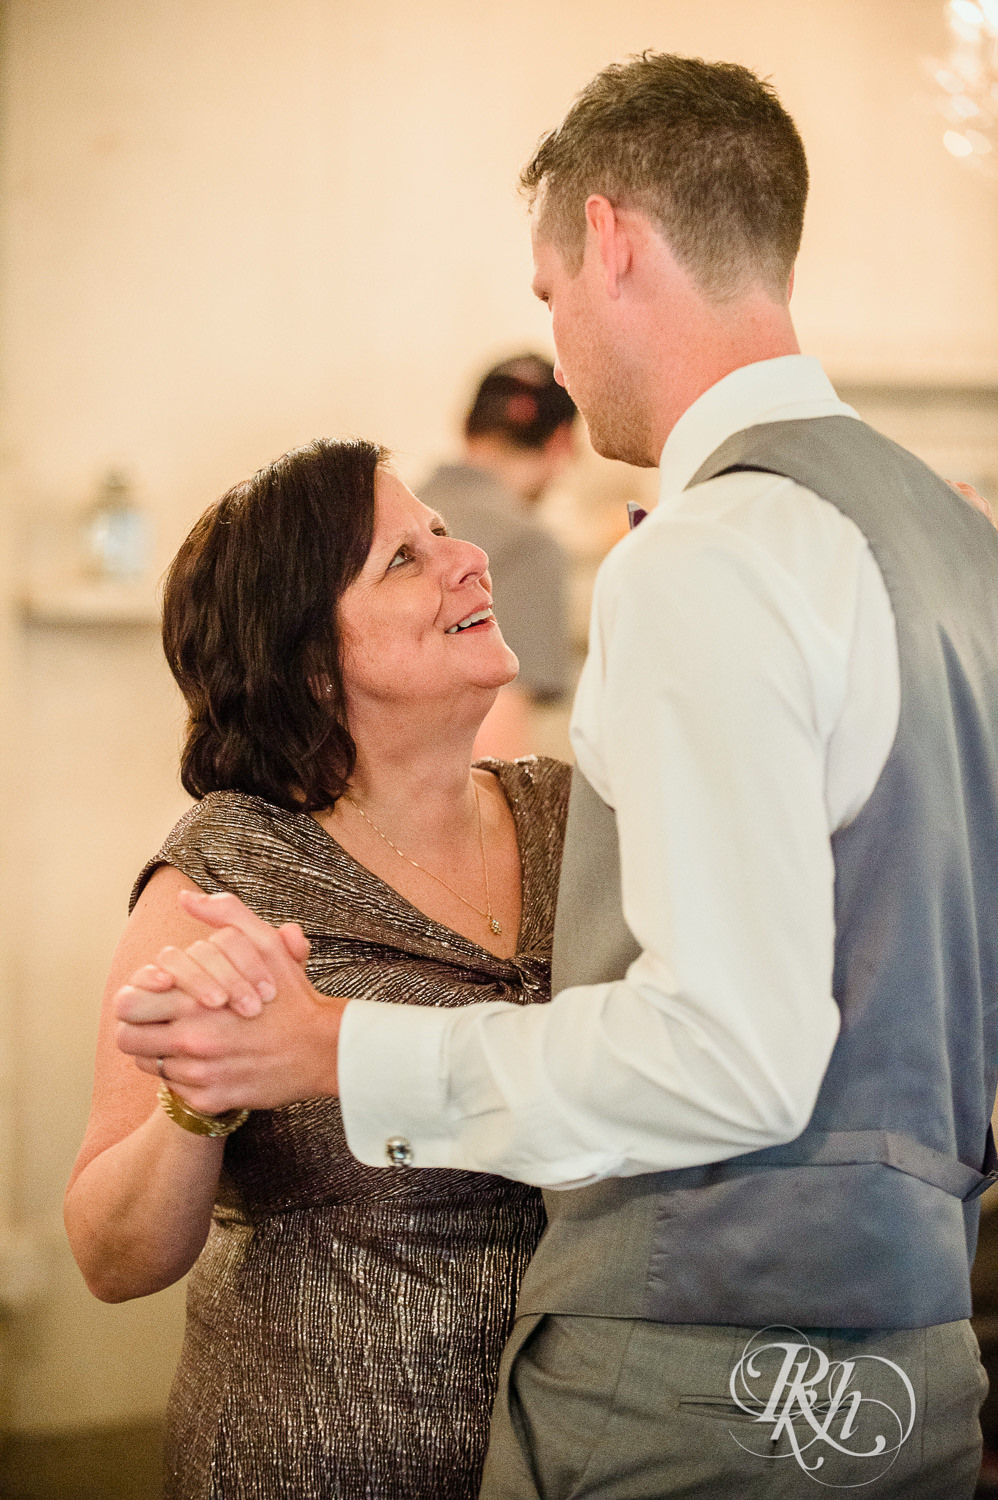 Groom and his mom dance during wedding reception at Camrose Hill Flower Farm in Stillwater, Minnesota.